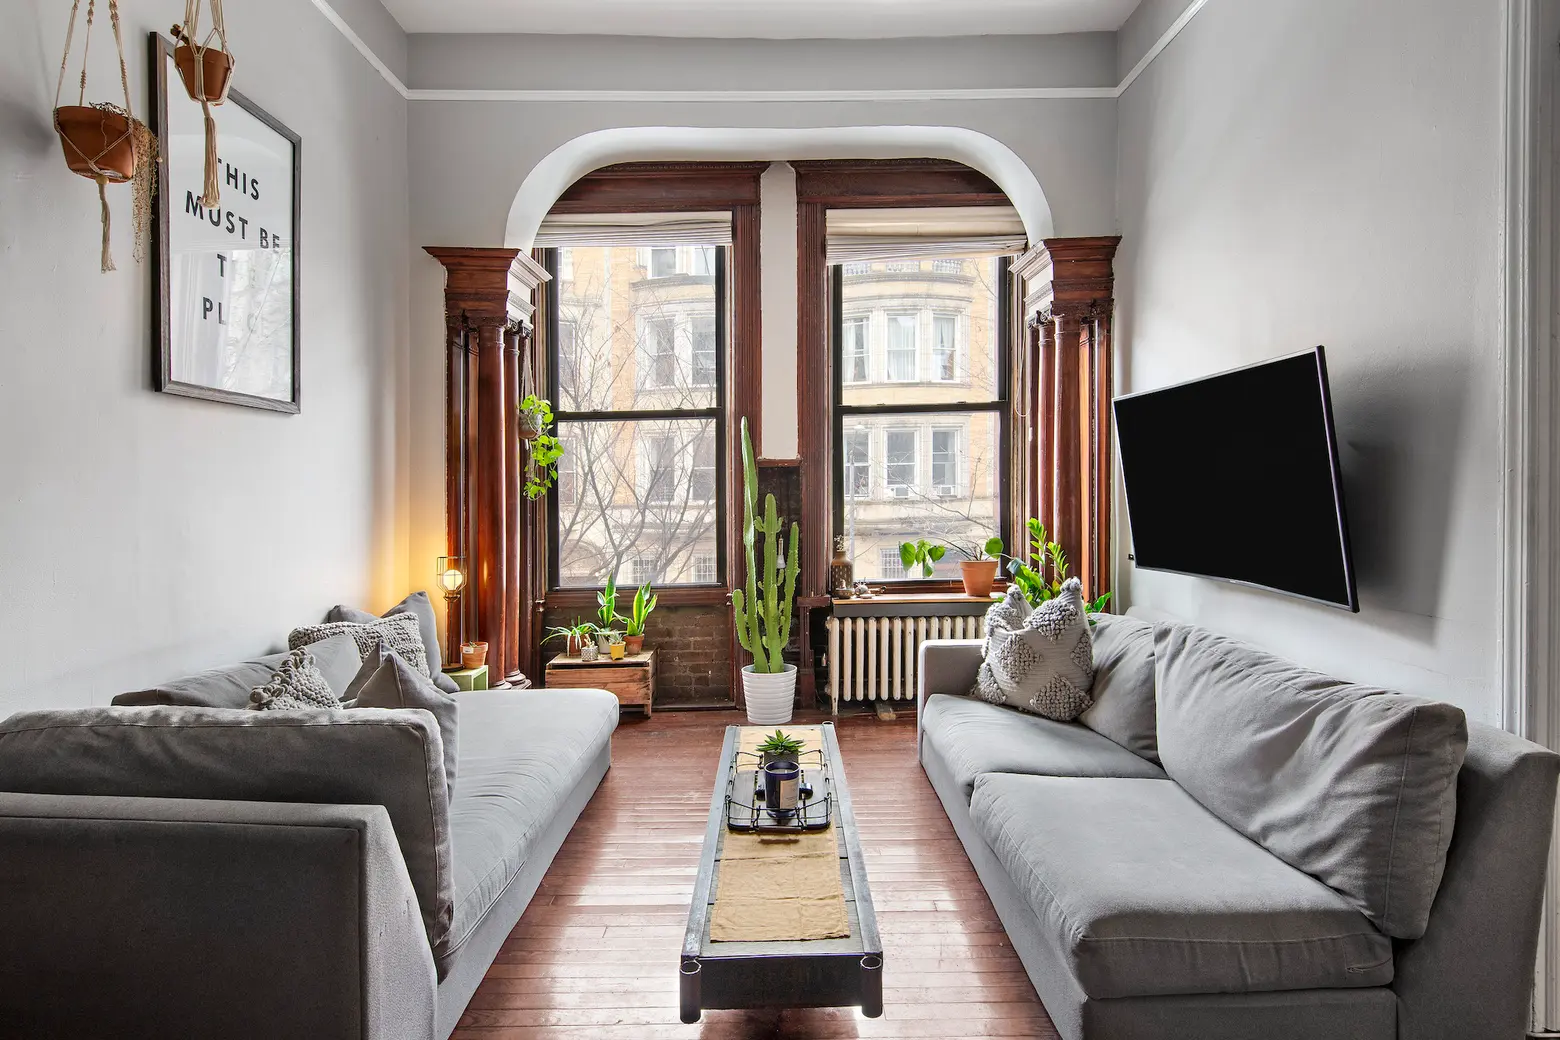 Asking $595K, this petite Upper West Side one-bedroom is big on pre-war charm